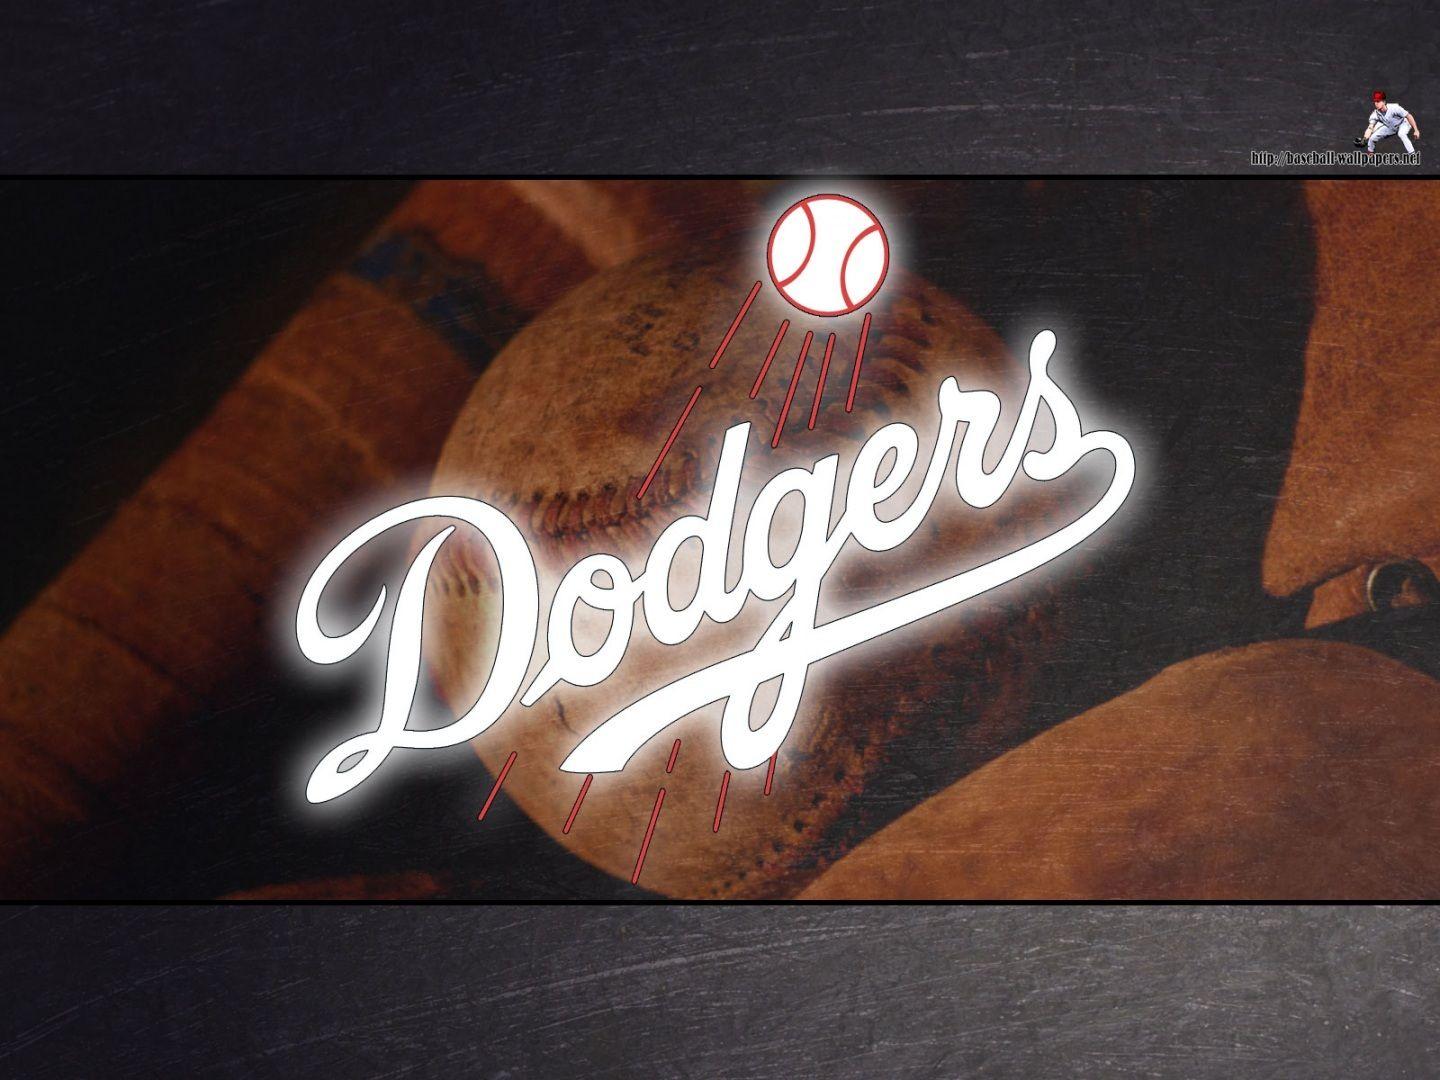 Los Angeles Dodgers Baseball Wallpapers